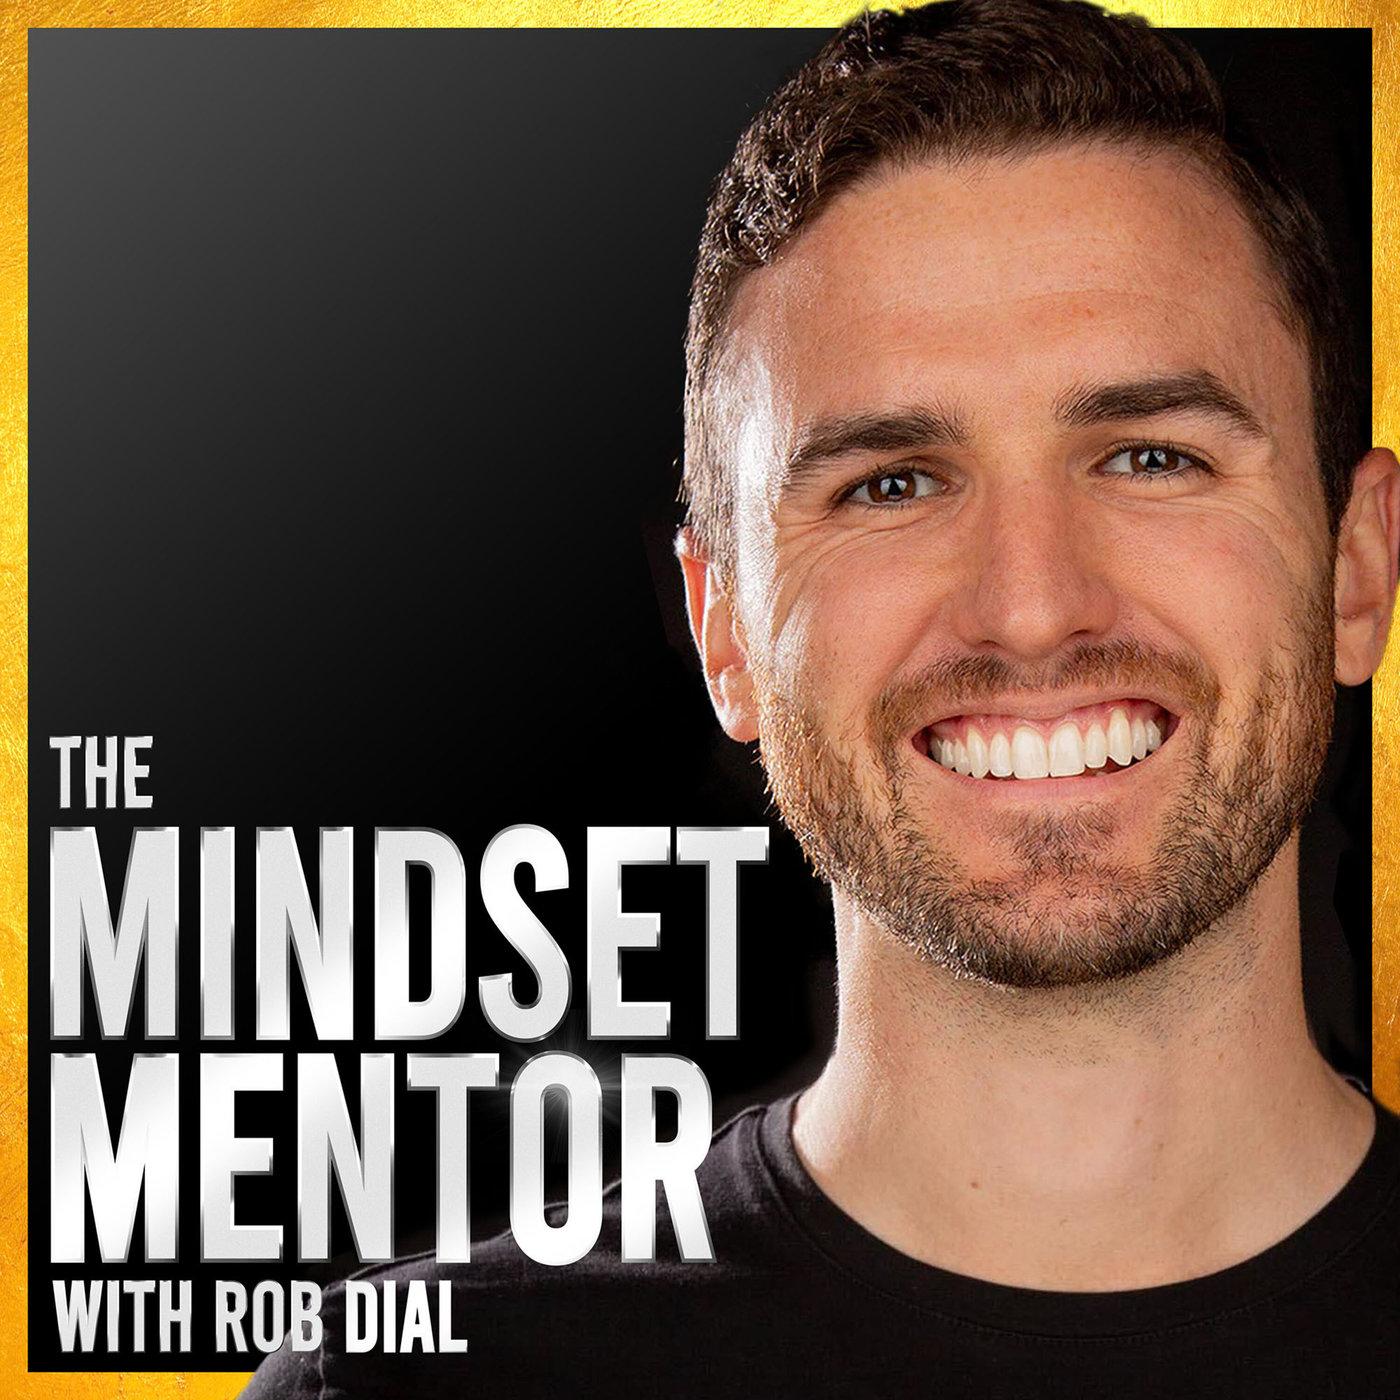 Show poster of The Mindset Mentor